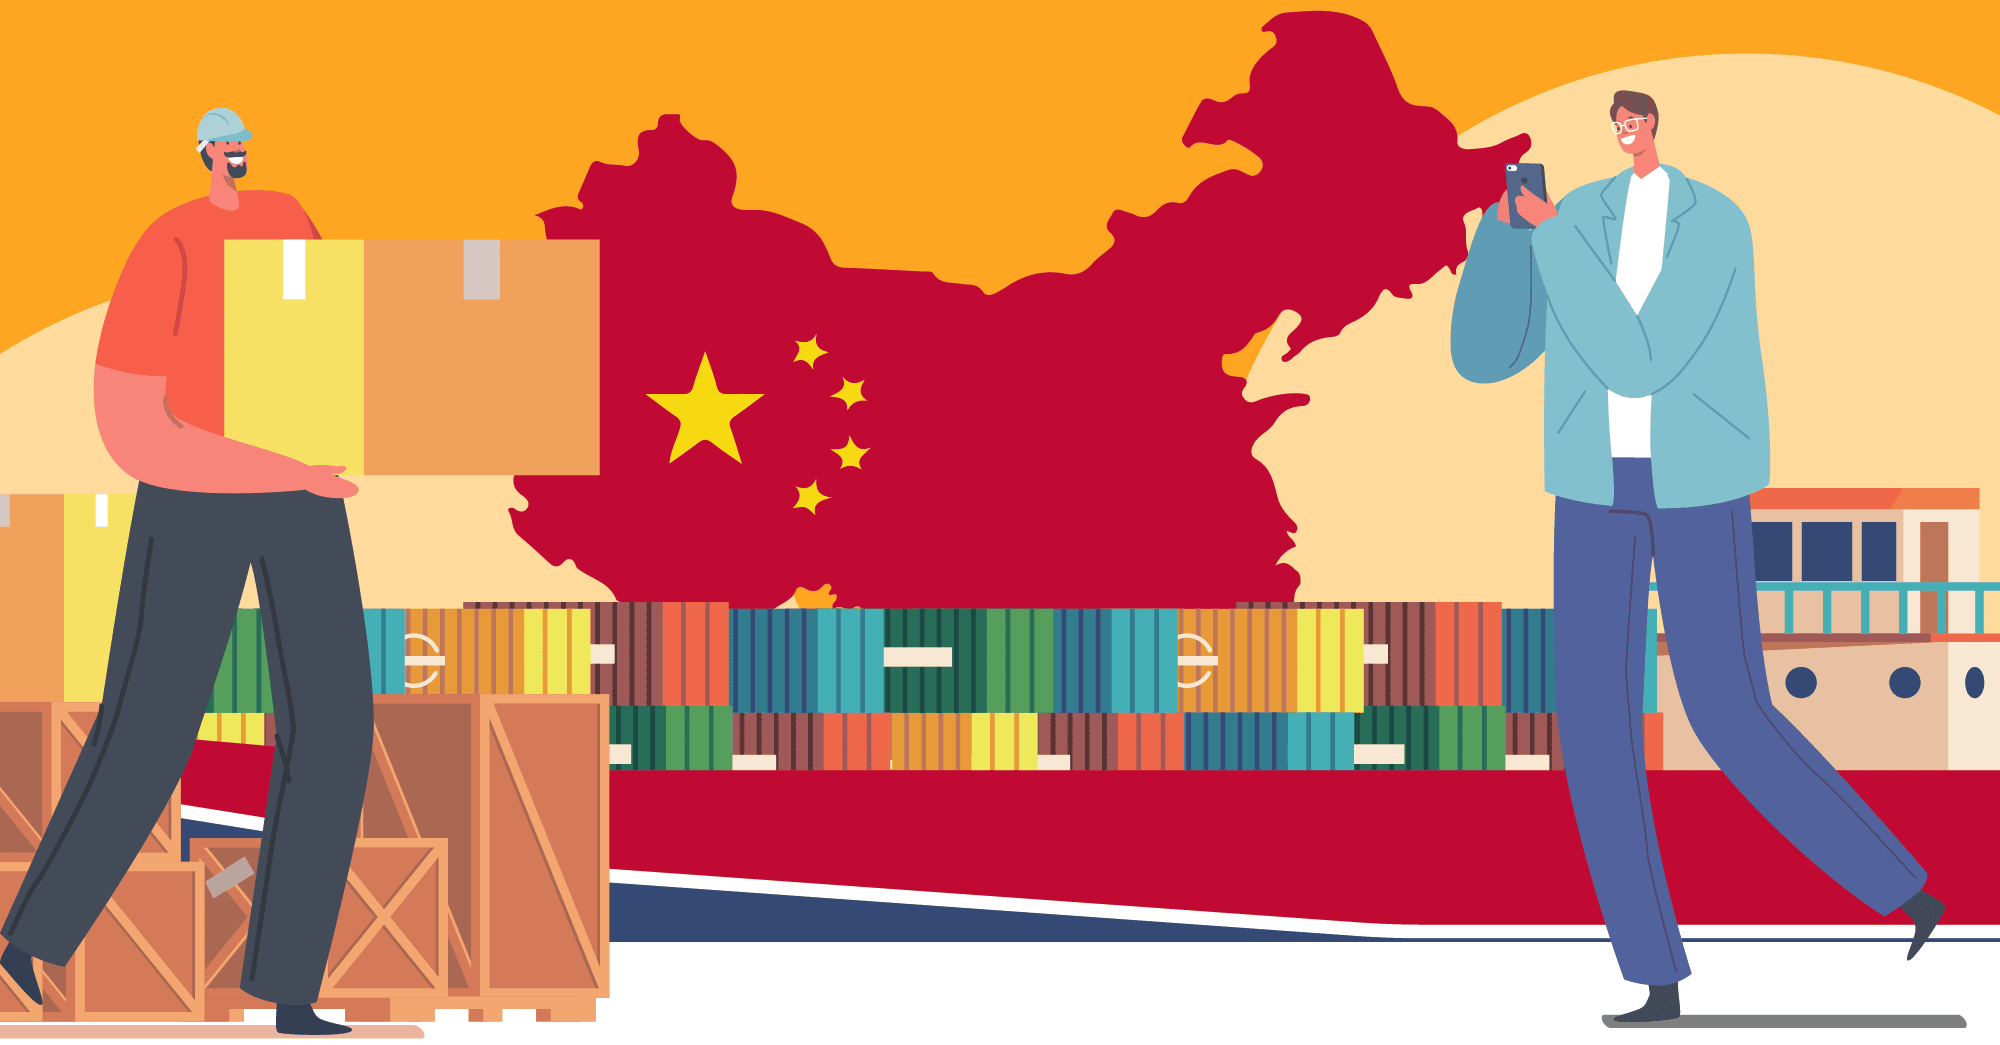 https://www.ecomcrew.com/wp-content/uploads/2021/08/How-to-Import-From-China-to-Sell-Profitably-in-2022-01.png